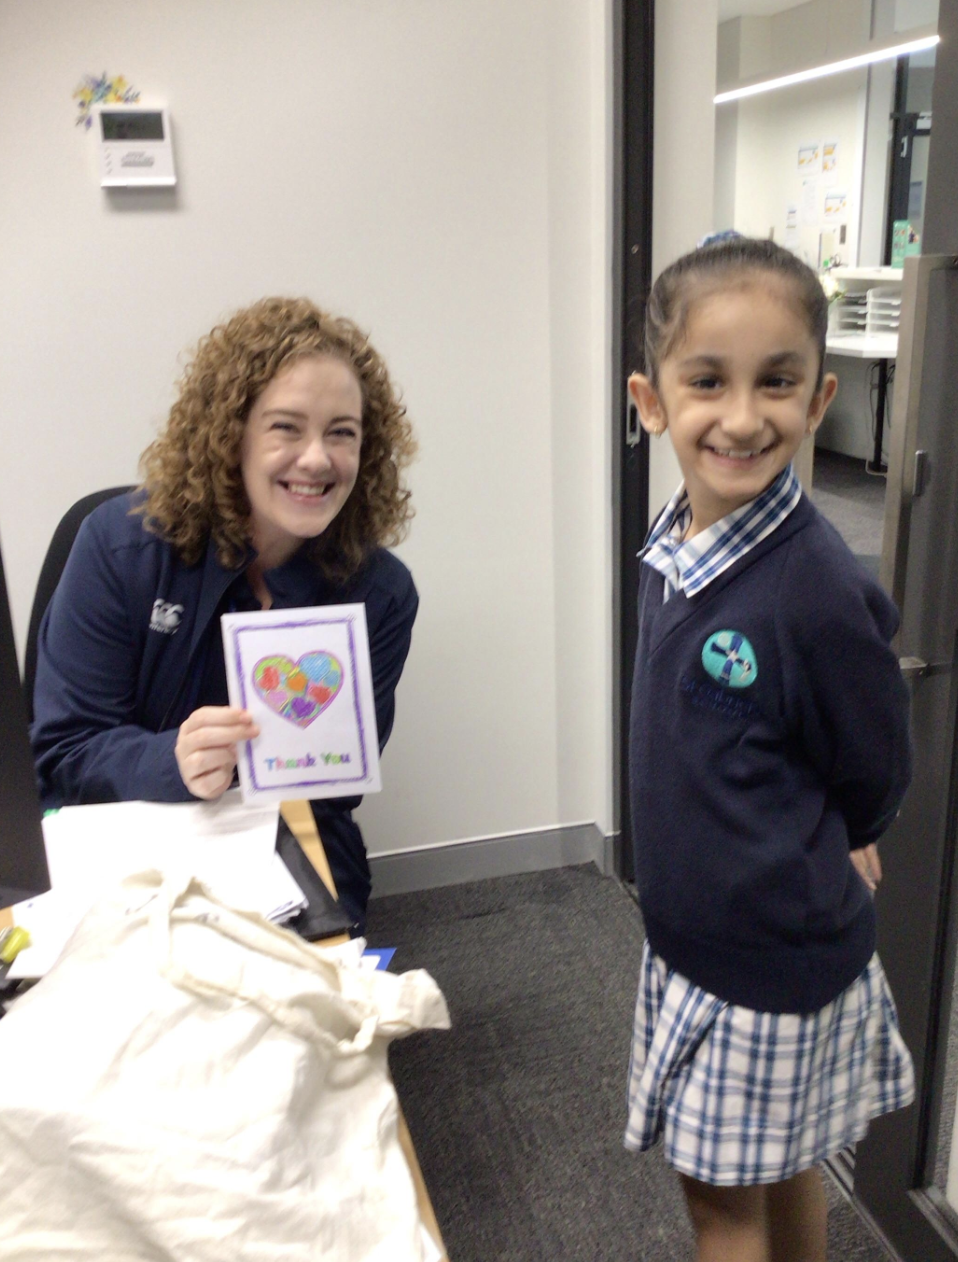 Mrs Bridge holding thank you card and smiling next to student.png